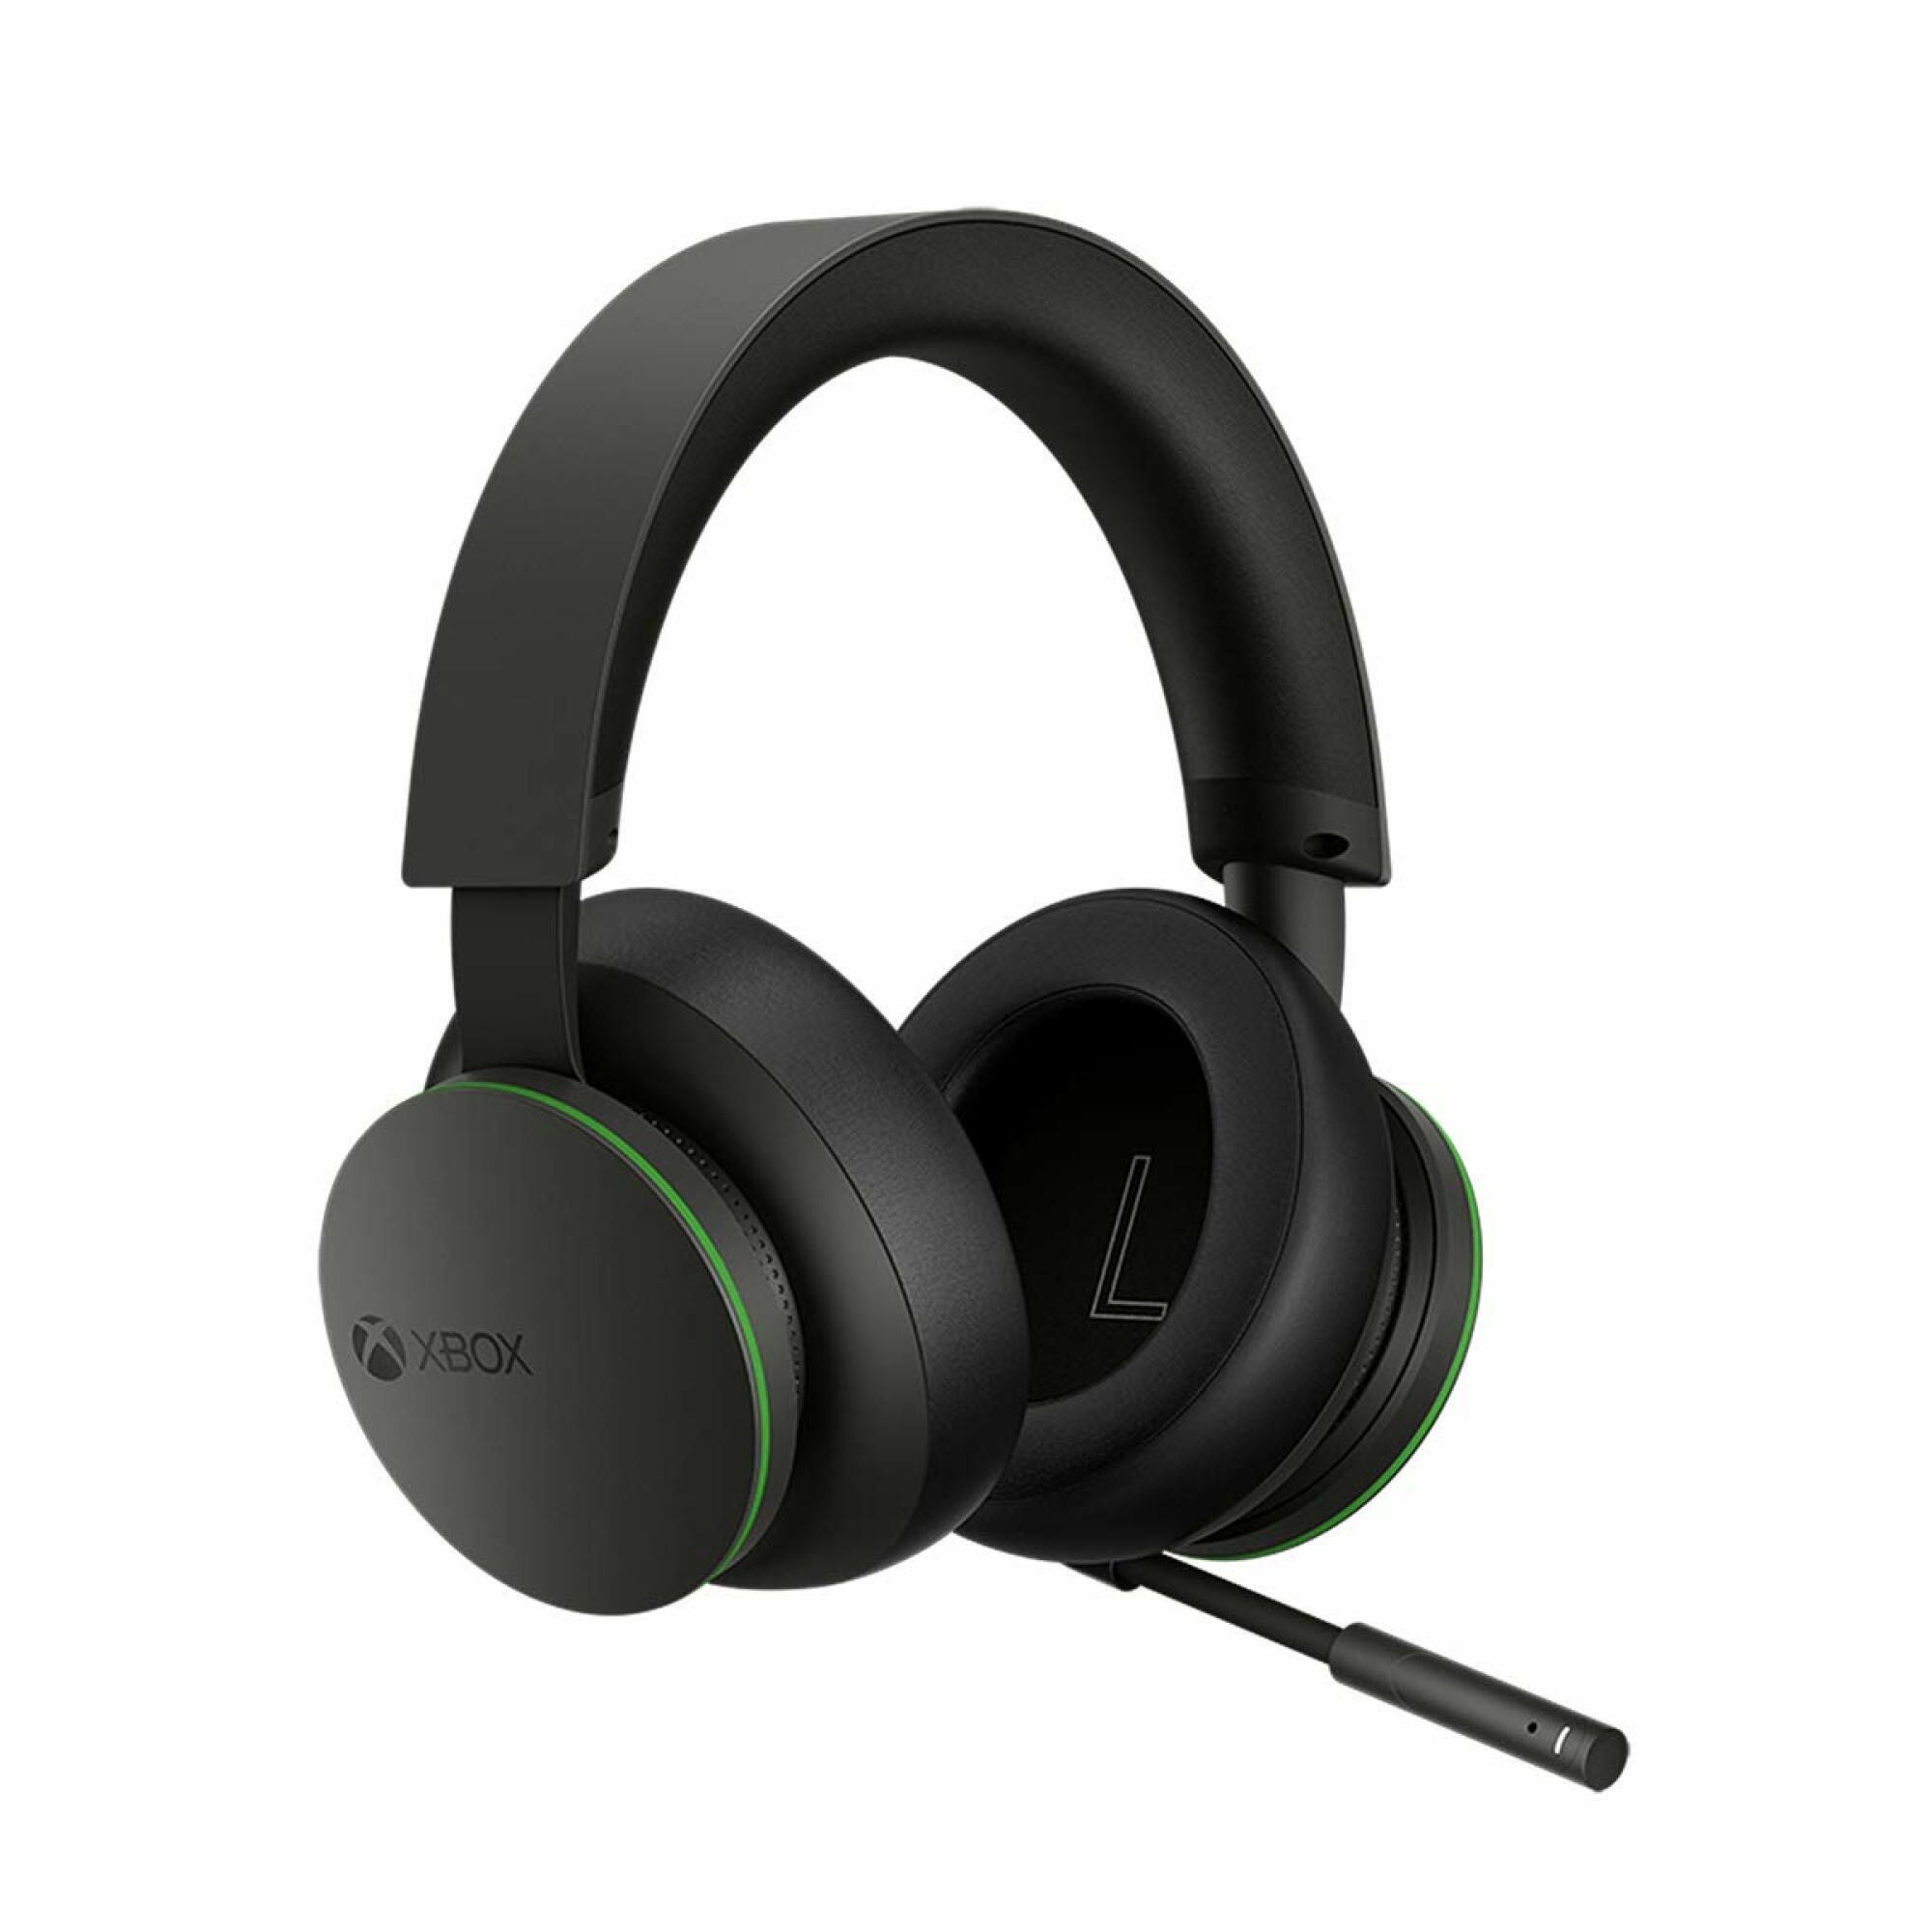 Headsets with a wireless dongle